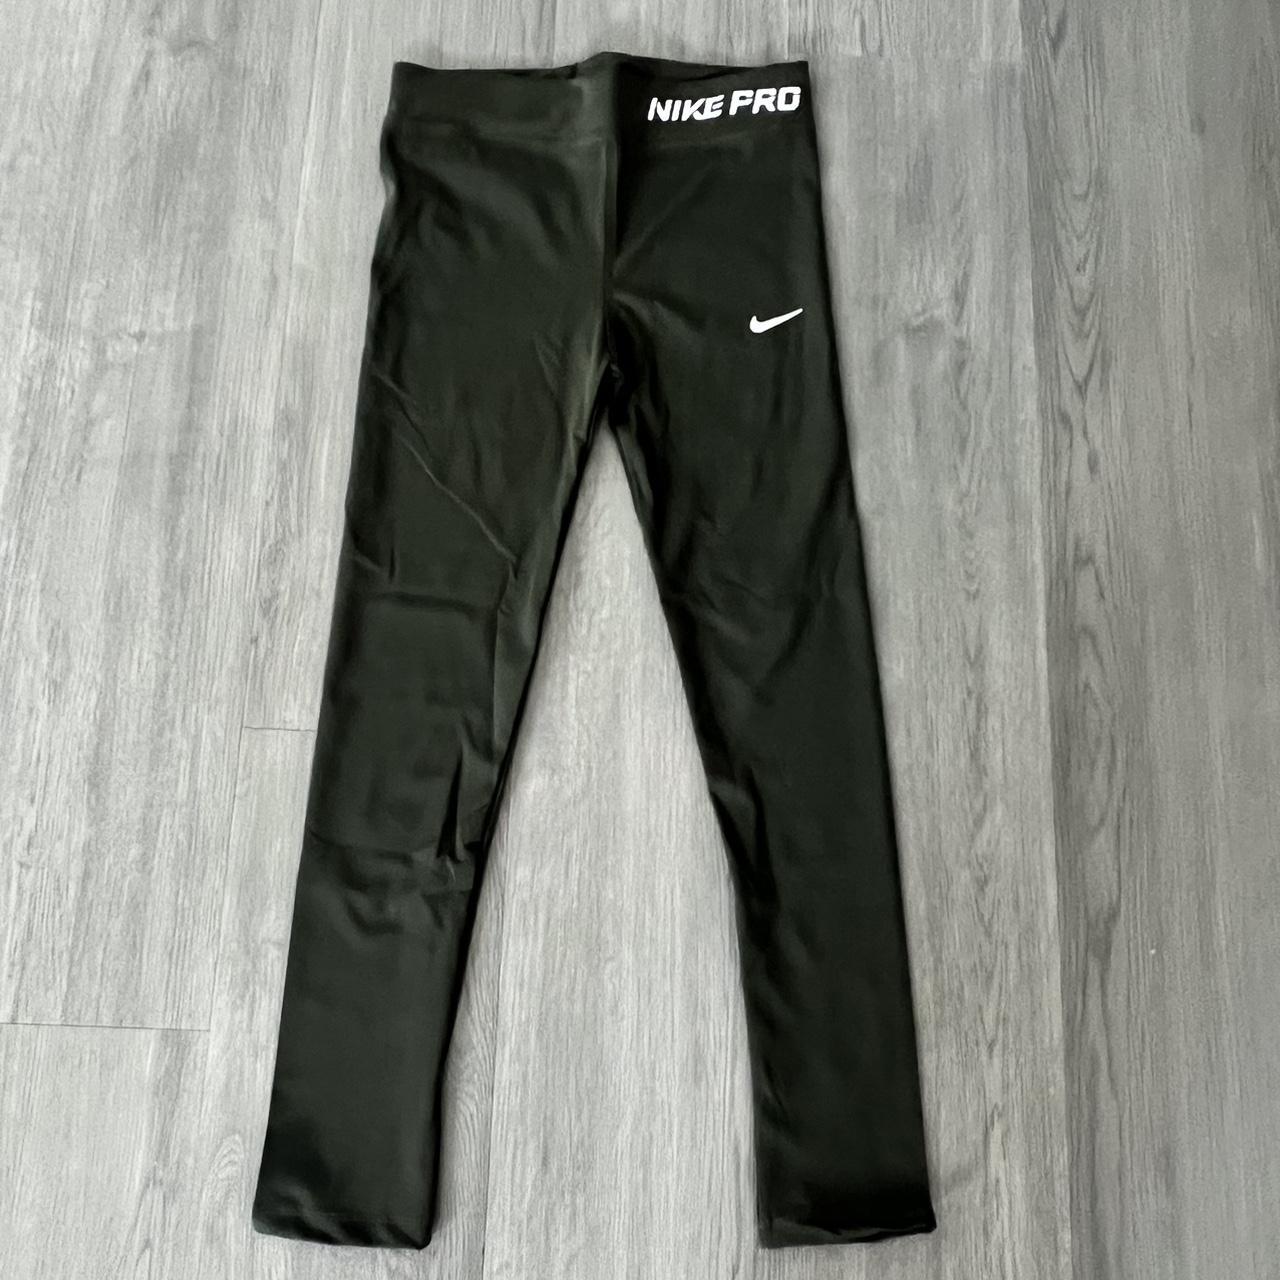 NIKE PRO TIGHTS Custom colored authentic Nike... - Depop